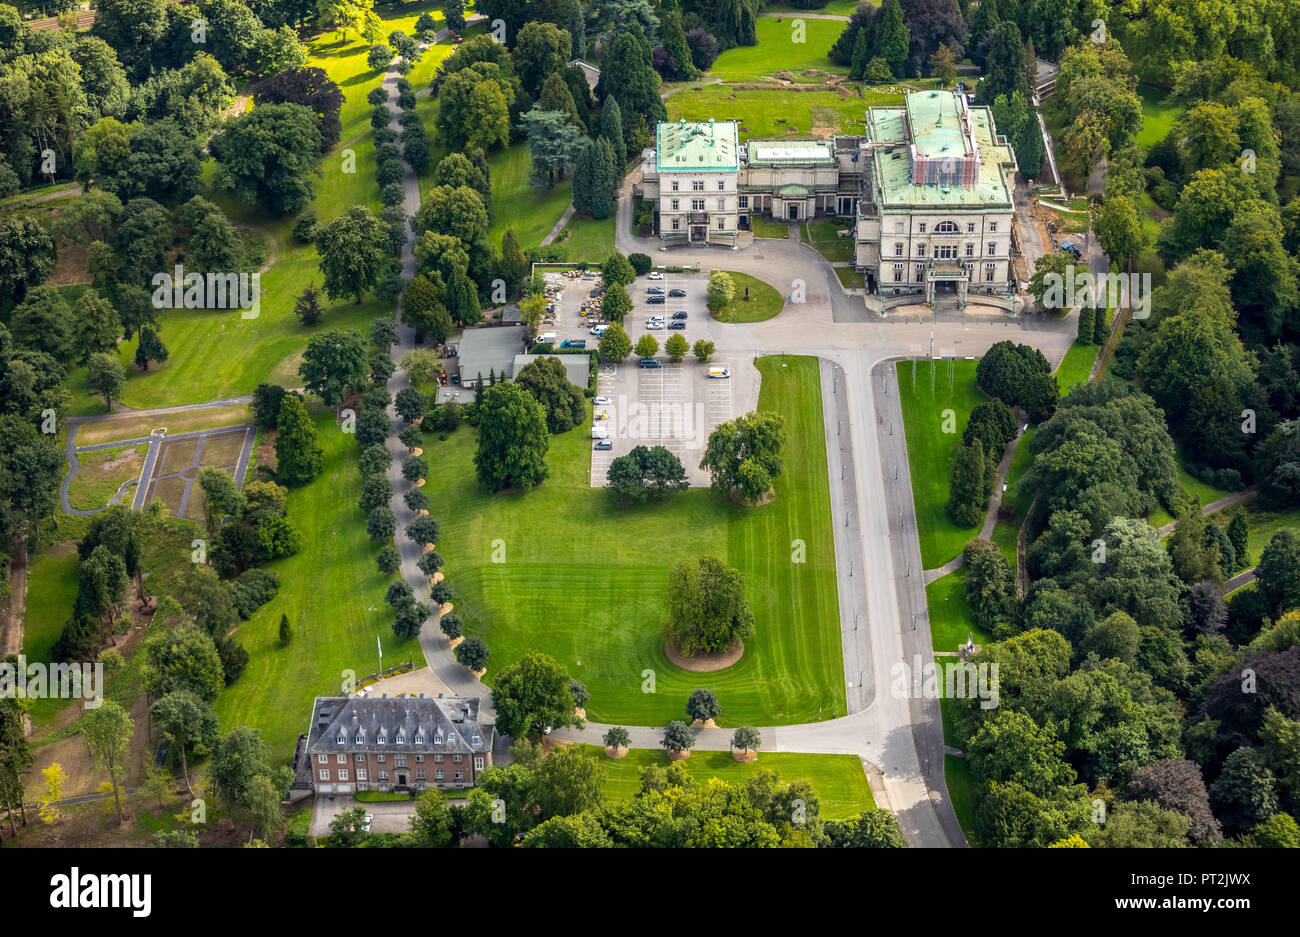 Villa Hügel with Alfried Krupp von Bohlen and Halbach Foundation, country estate of the industrialist Alfred Krupp from the 19th century with ornate rooms and park, Essen, Ruhr area, North Rhine-Westphalia, Germany Stock Photo